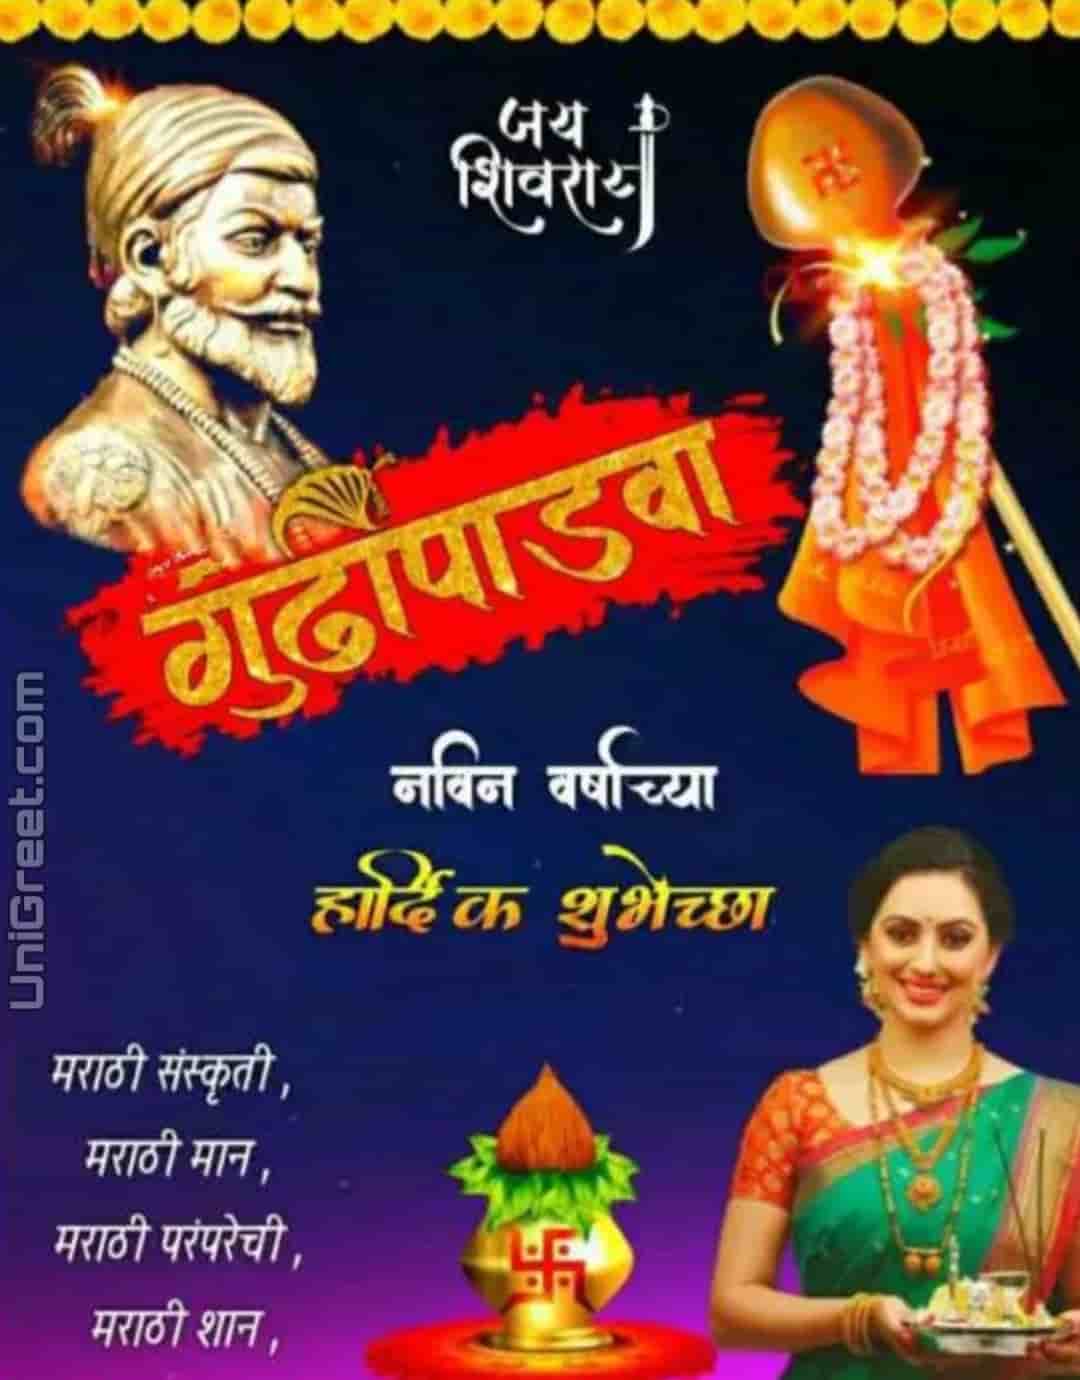 2020 Happy Gudi Padwa Images In Marathi With Gudi Padwa Status Photos The festival is traditionally known as gudi padwa, which indicates the starting of the new year begins with the chaitra month as per hindu calendar. 2020 happy gudi padwa images in marathi